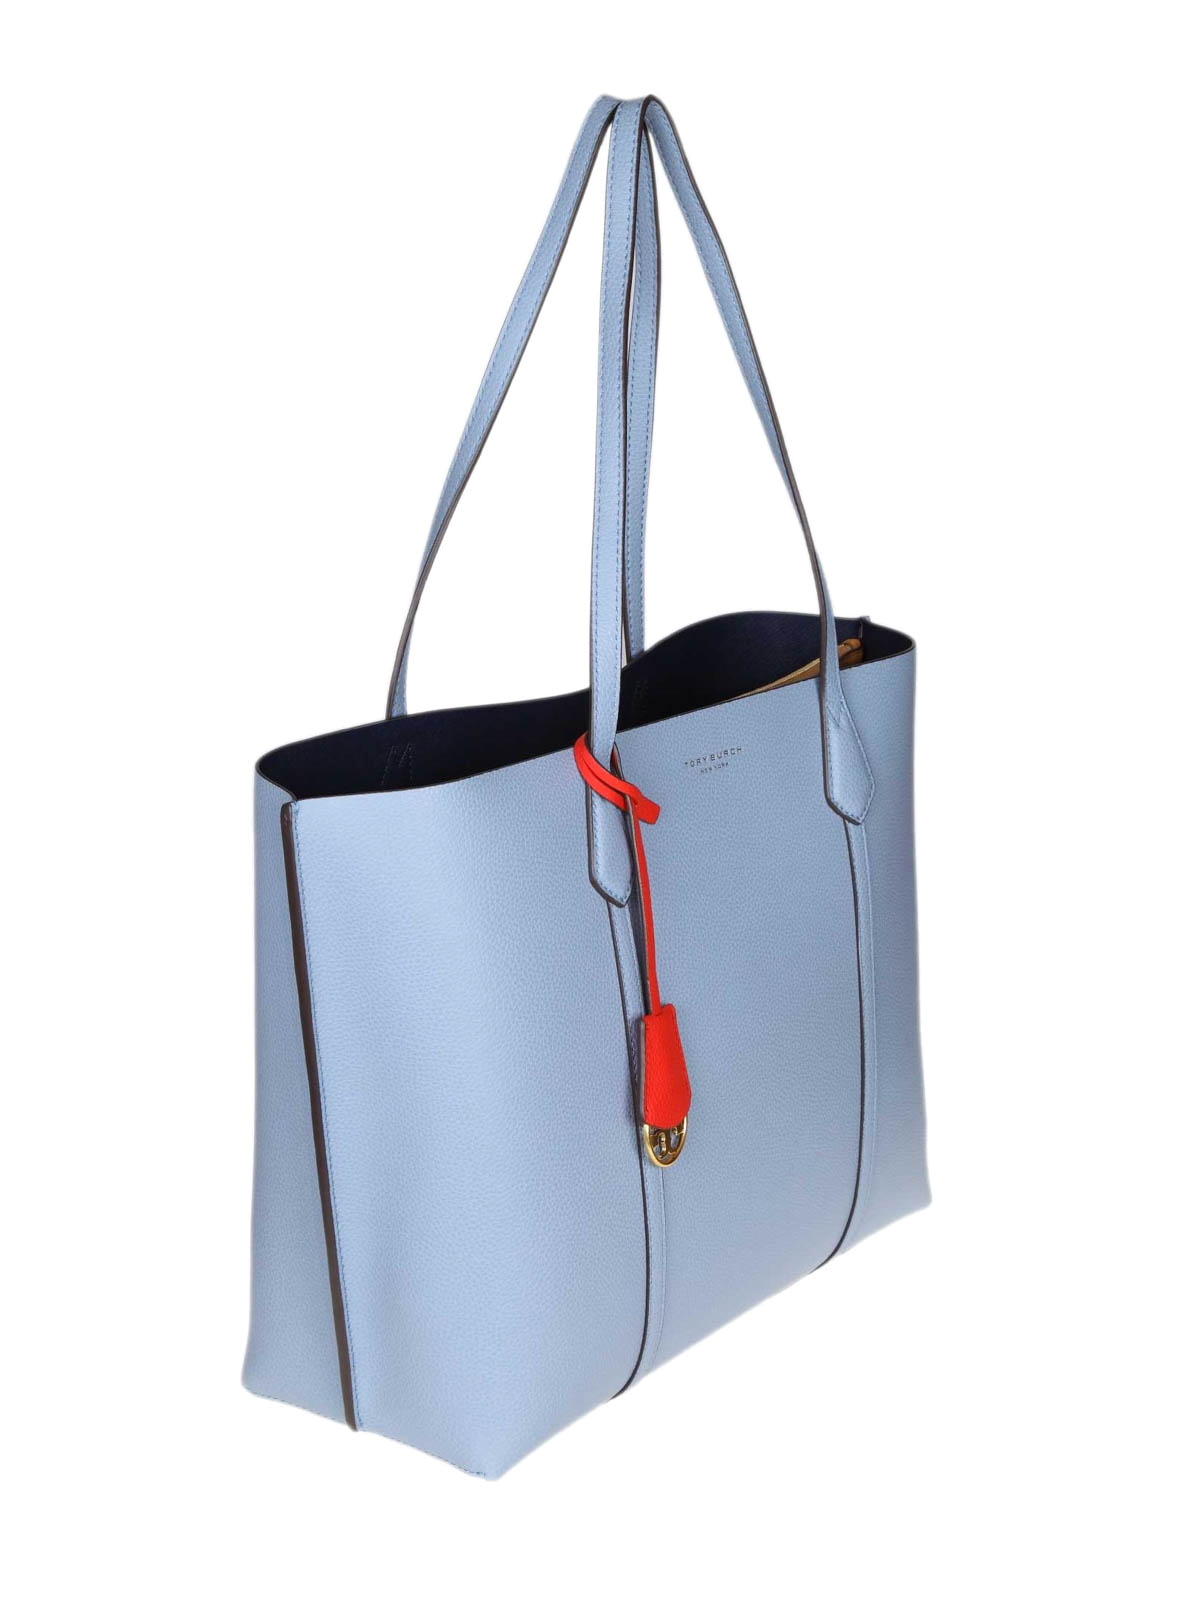 Totes bags Tory Burch - perry shopping bag in light blue leather